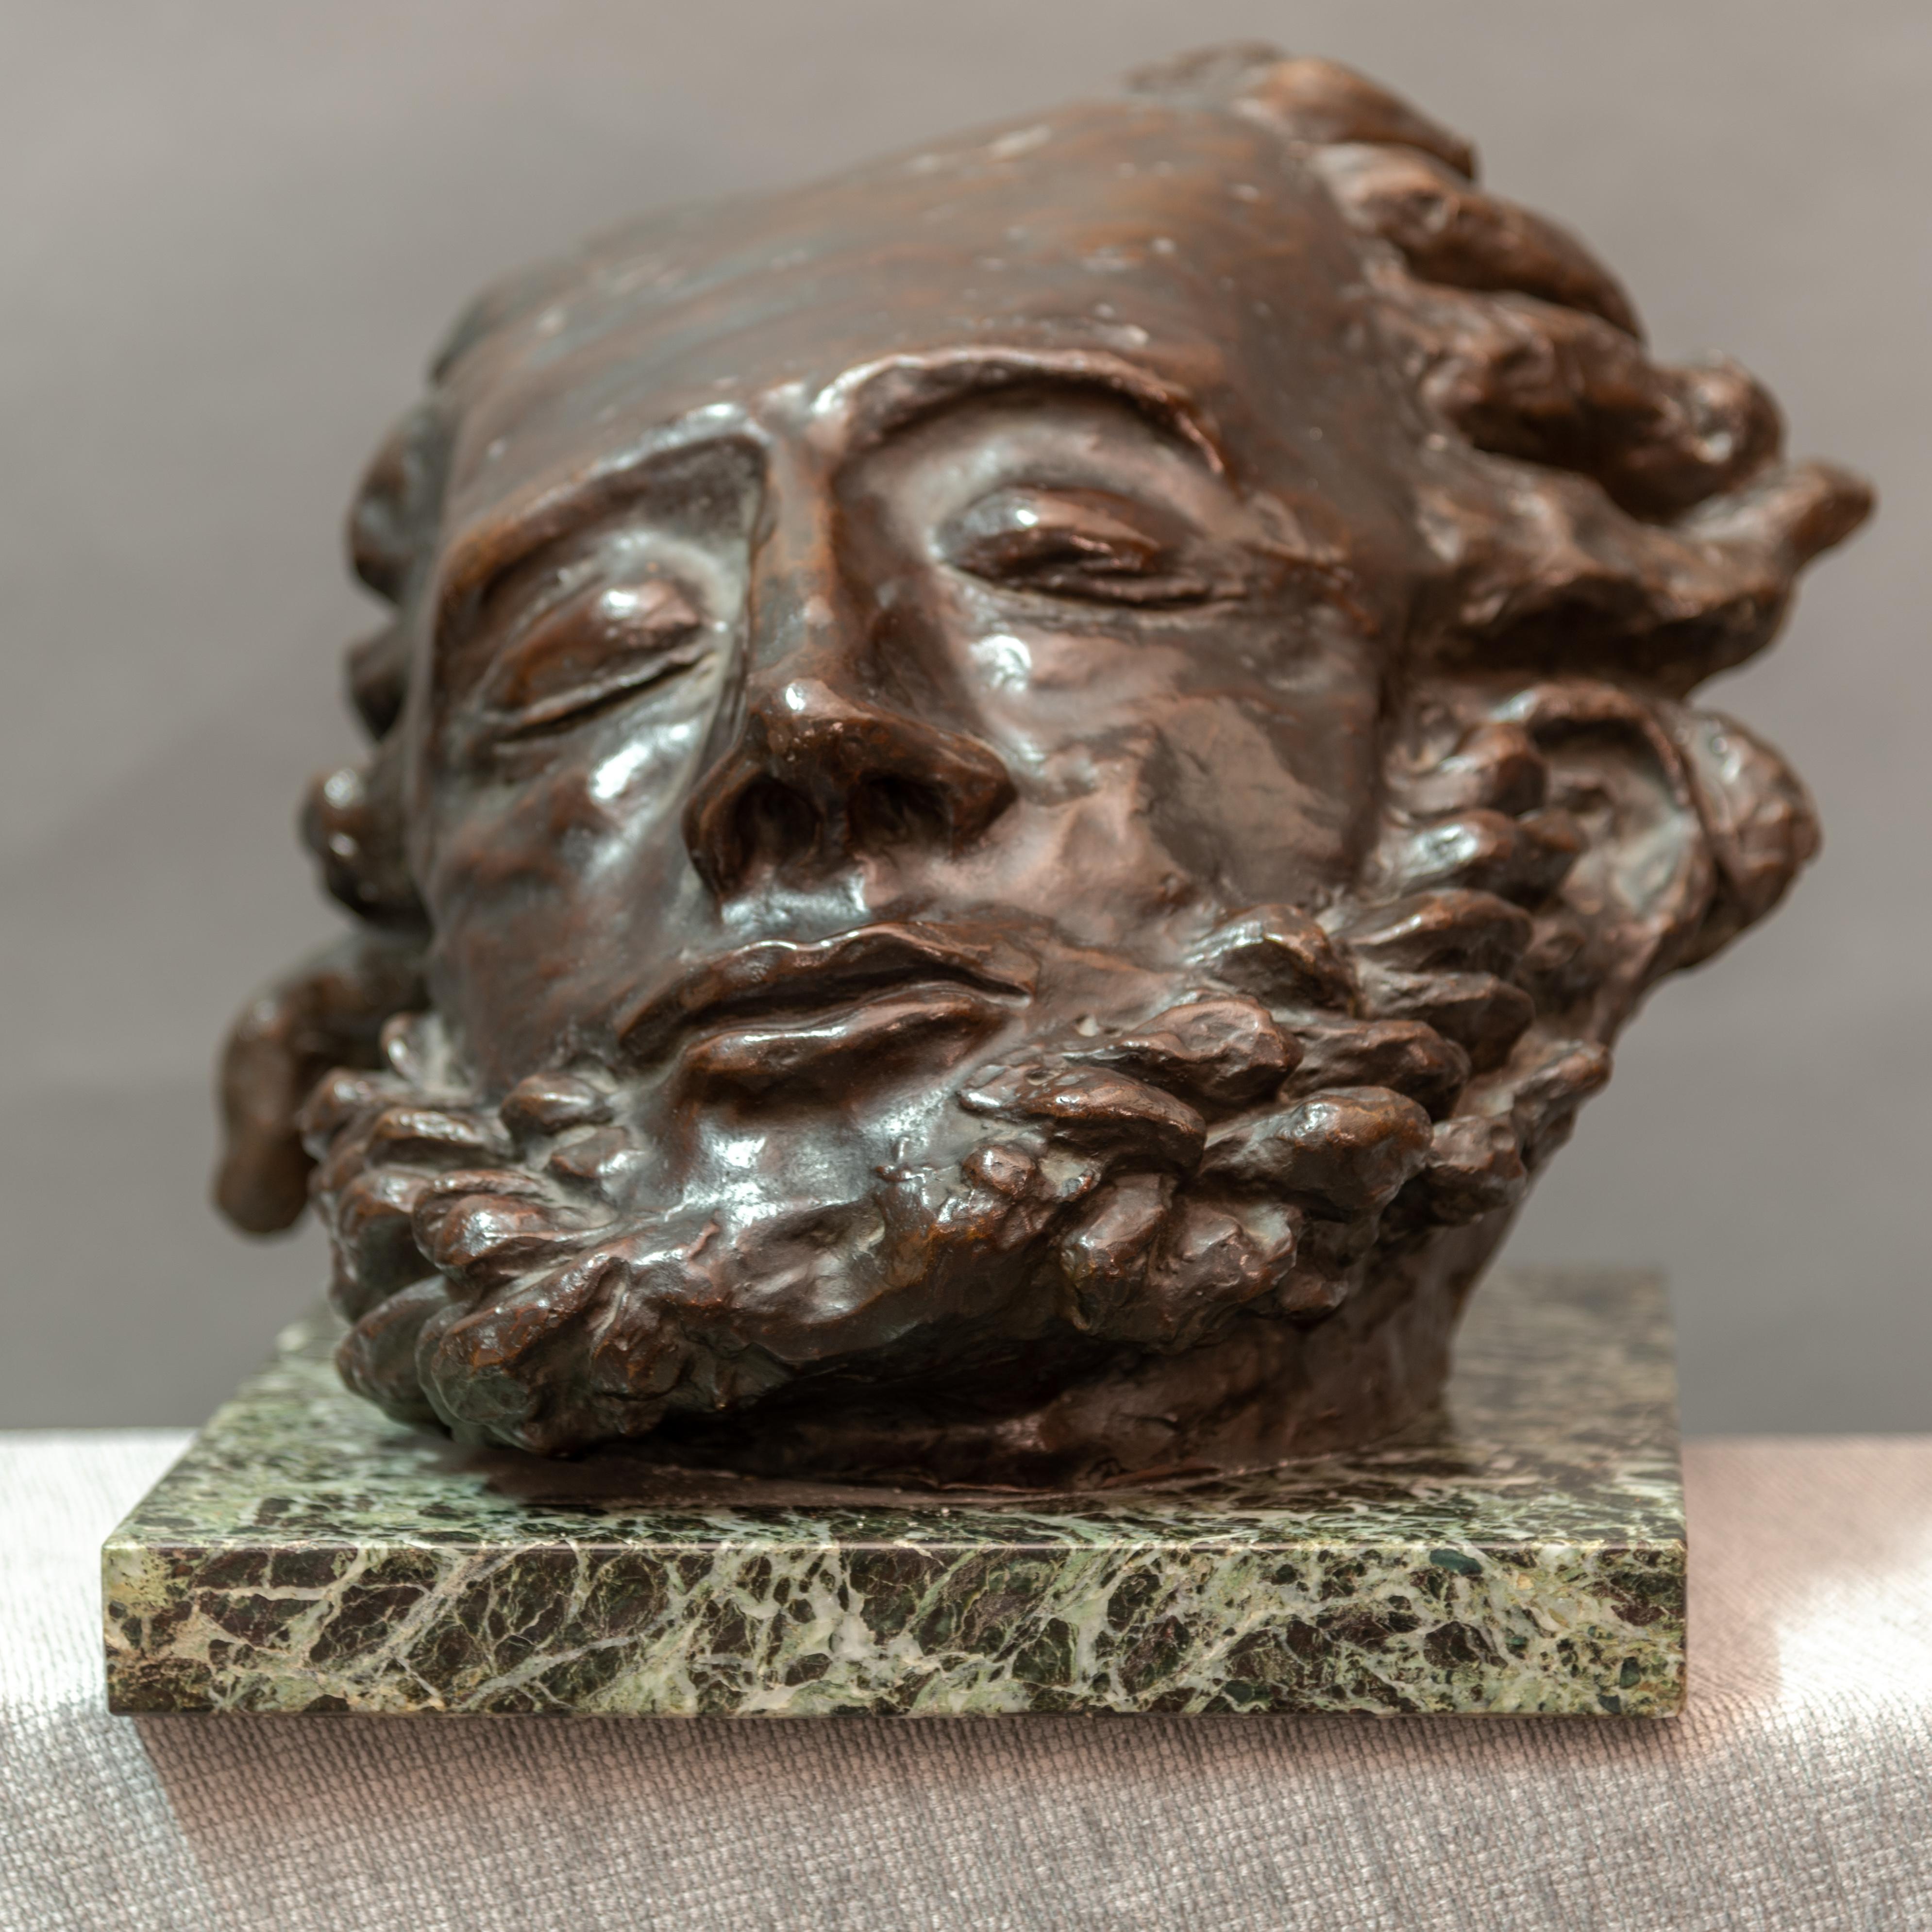 Bronze on a marble base It bears Mayo's signature. 
 Trademark Fondart - Lagana Napoli.
“Of the first sculpture, a group of highly vigorous original artistry, all that remains is Adam's Mask “
This phrase is from a very rare 1929 pamphlet L'Abruzzo